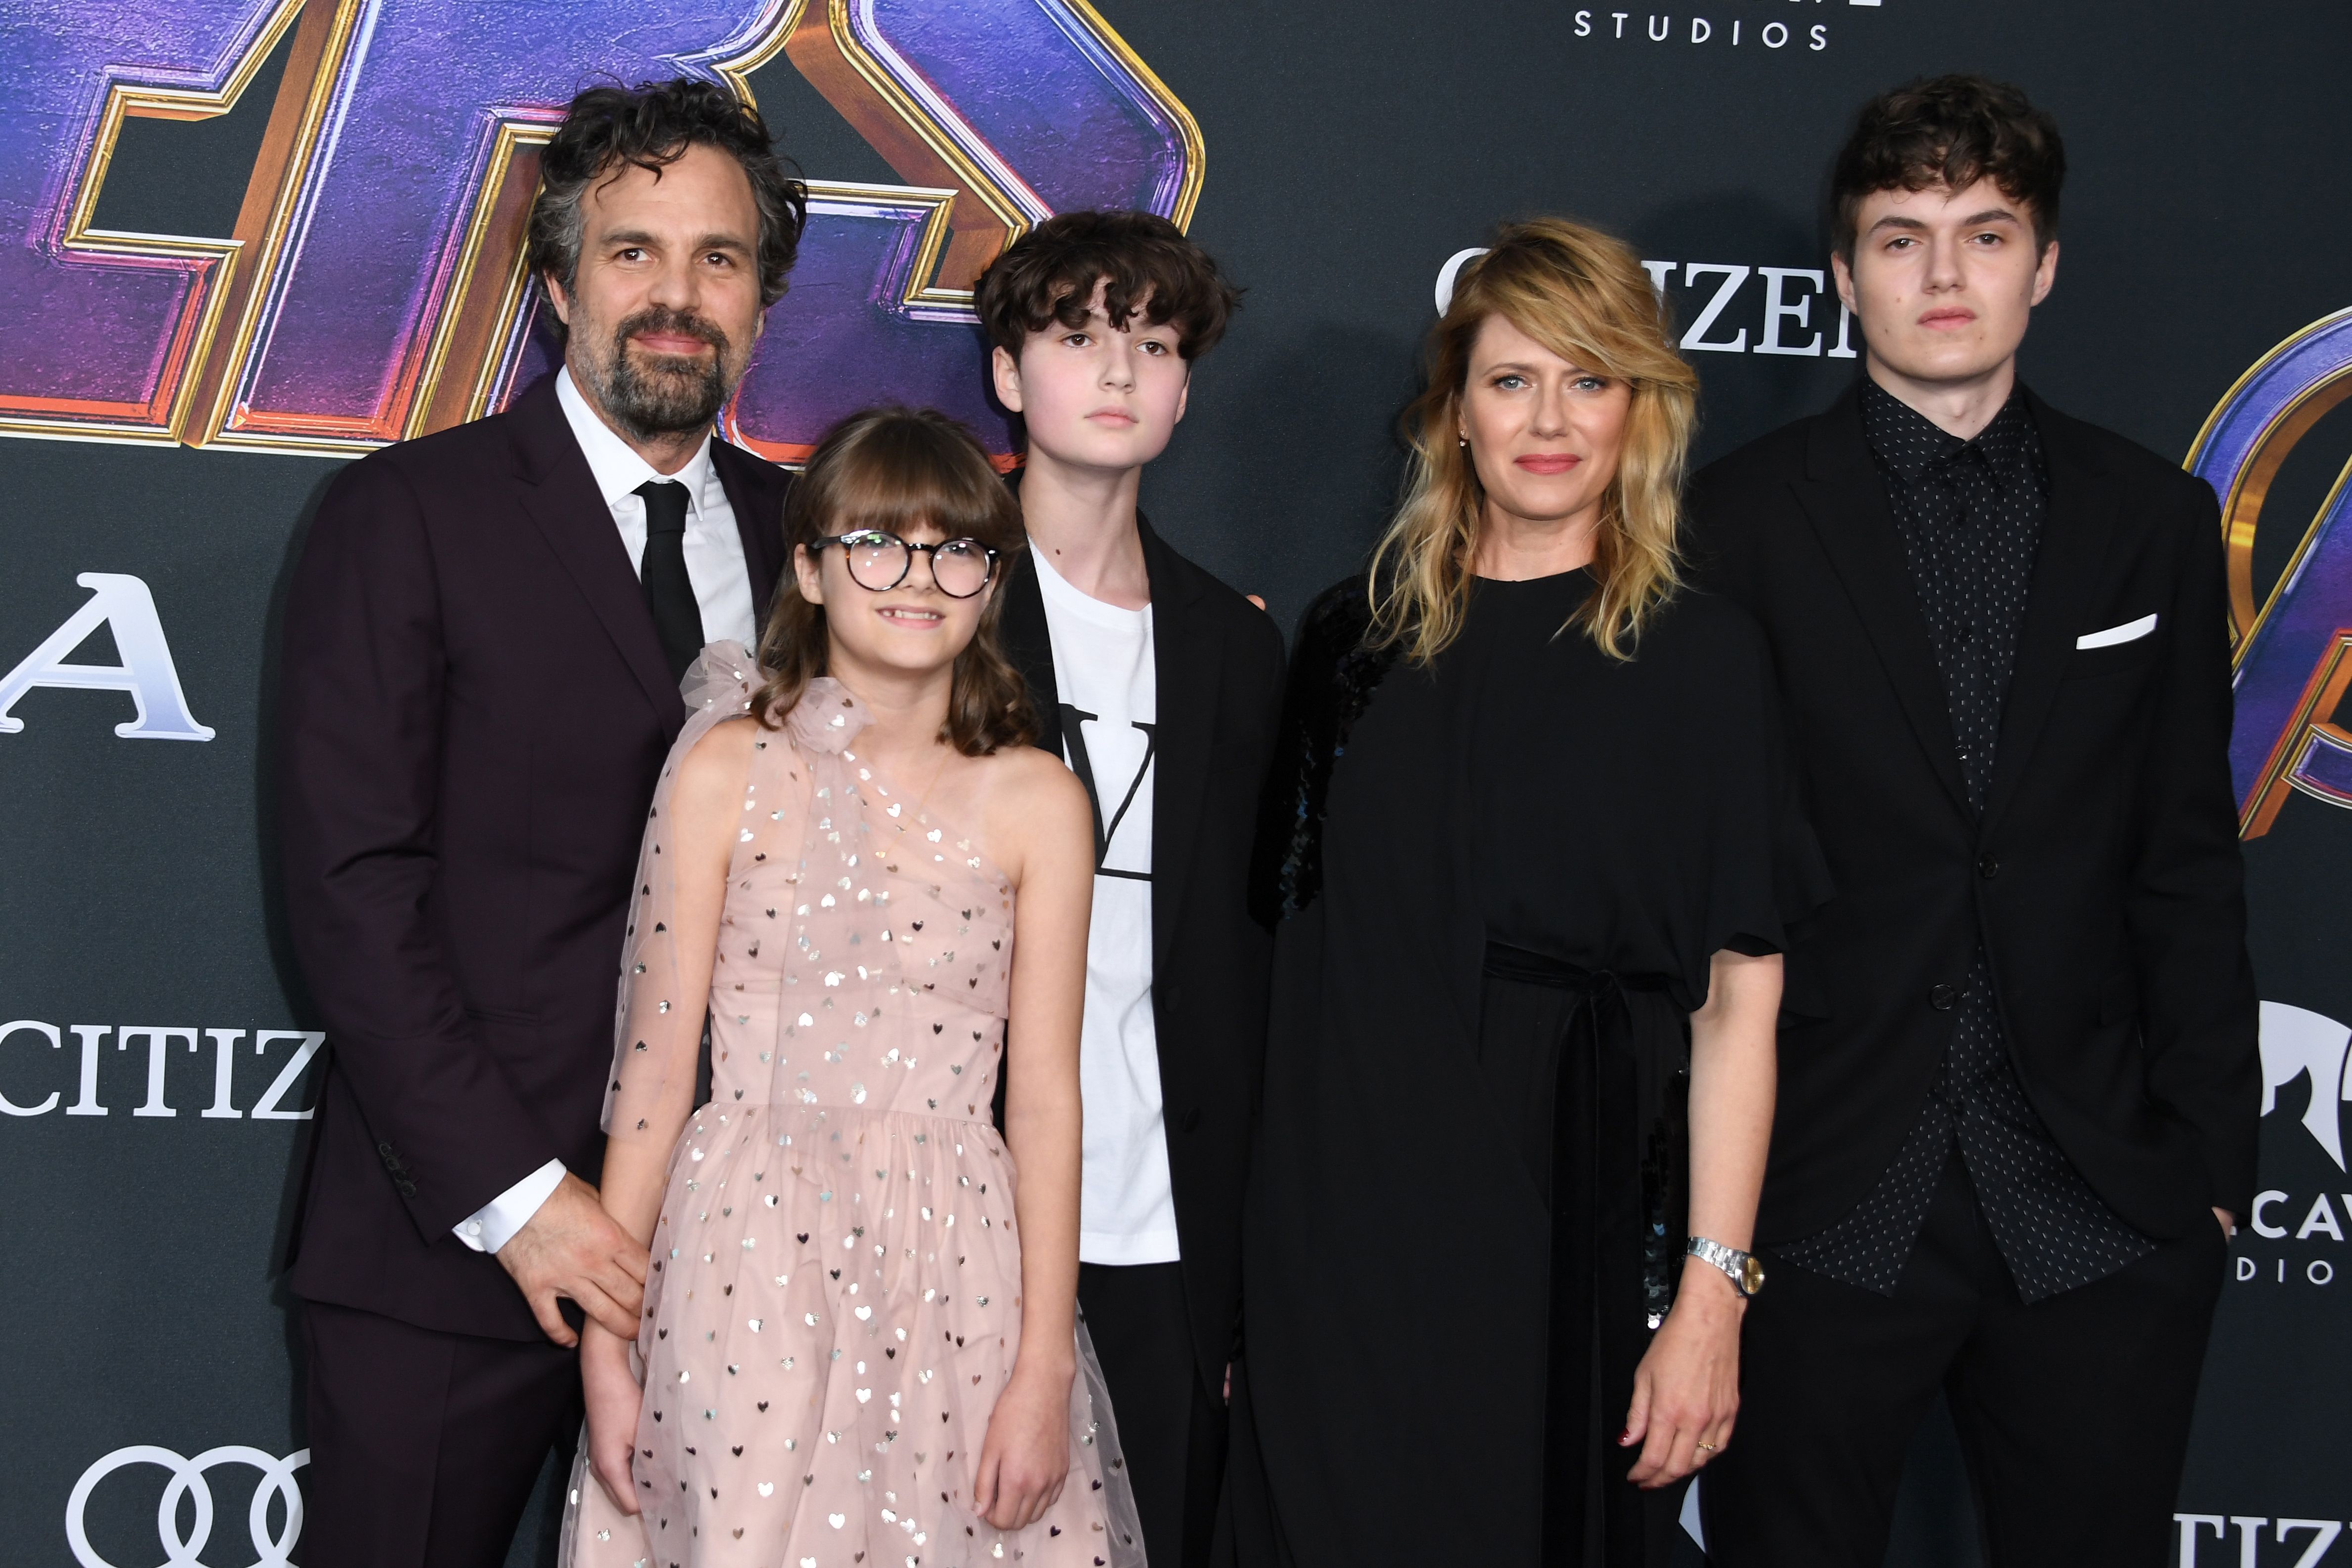 Mark, Odette, Bella Noche, Sunrise, and Keen Ruffalo at the premiere of "Avengers: Endgame" in Los Angeles, California on April 22, 2019 | Source: Getty Images